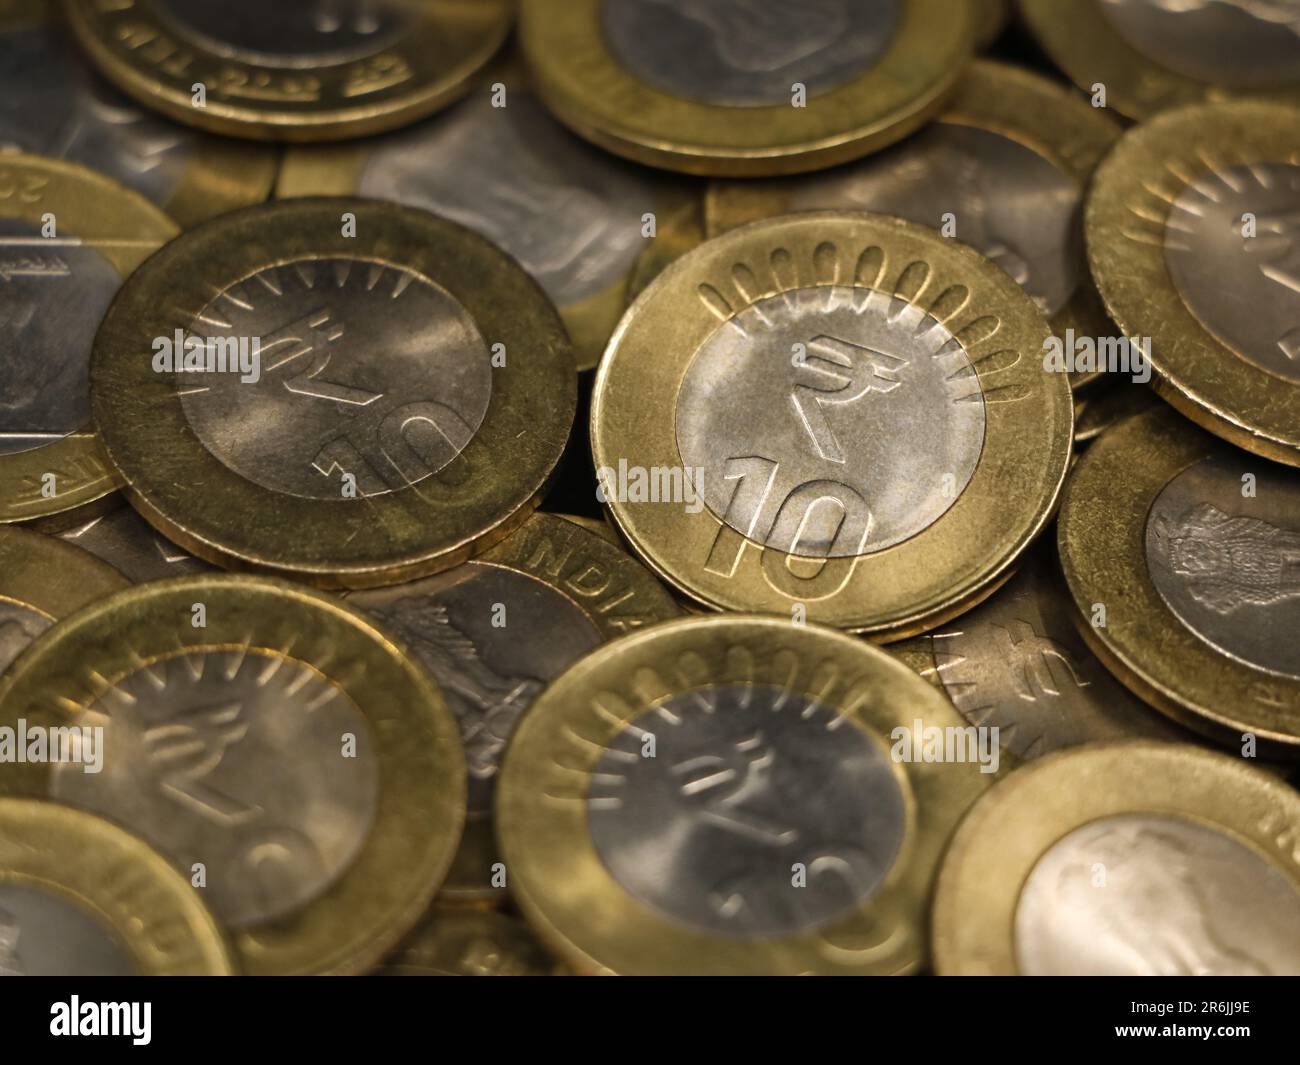 a mixed collection of rare vintage indian bimetallic 10 (ten) rupee coins gold and silver in a pile Stock Photo